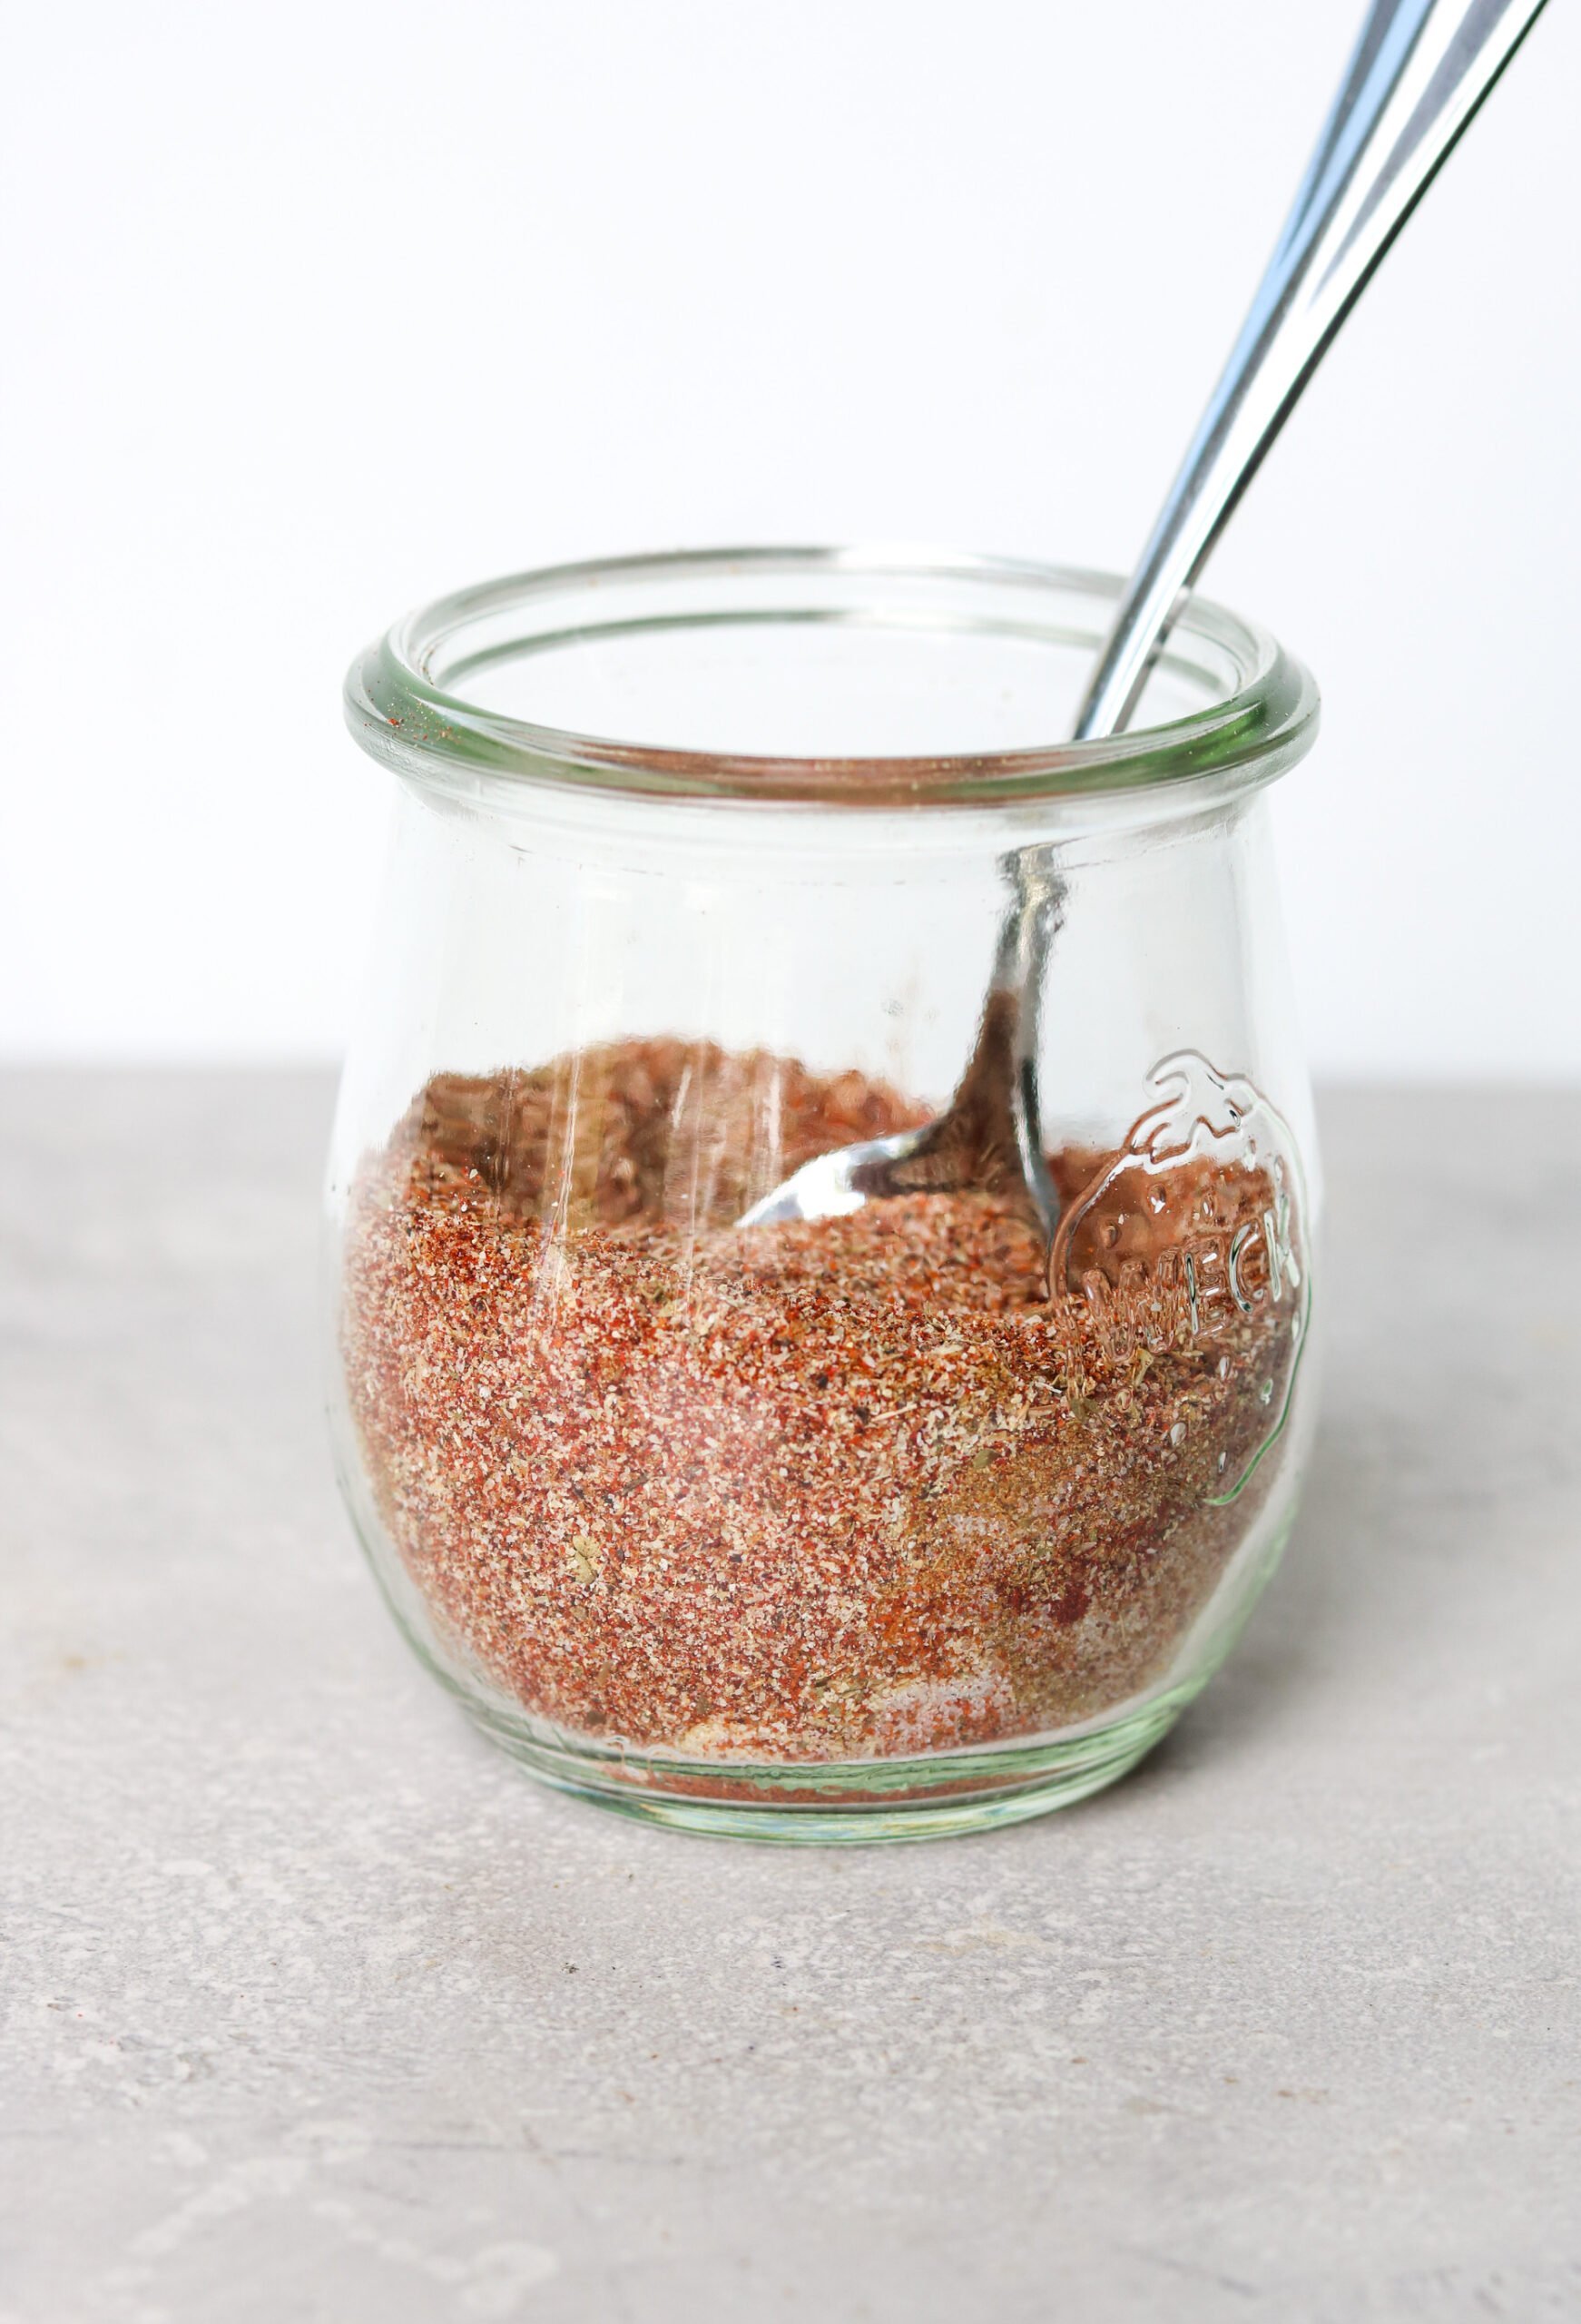 spices in a glass jar with a spoon